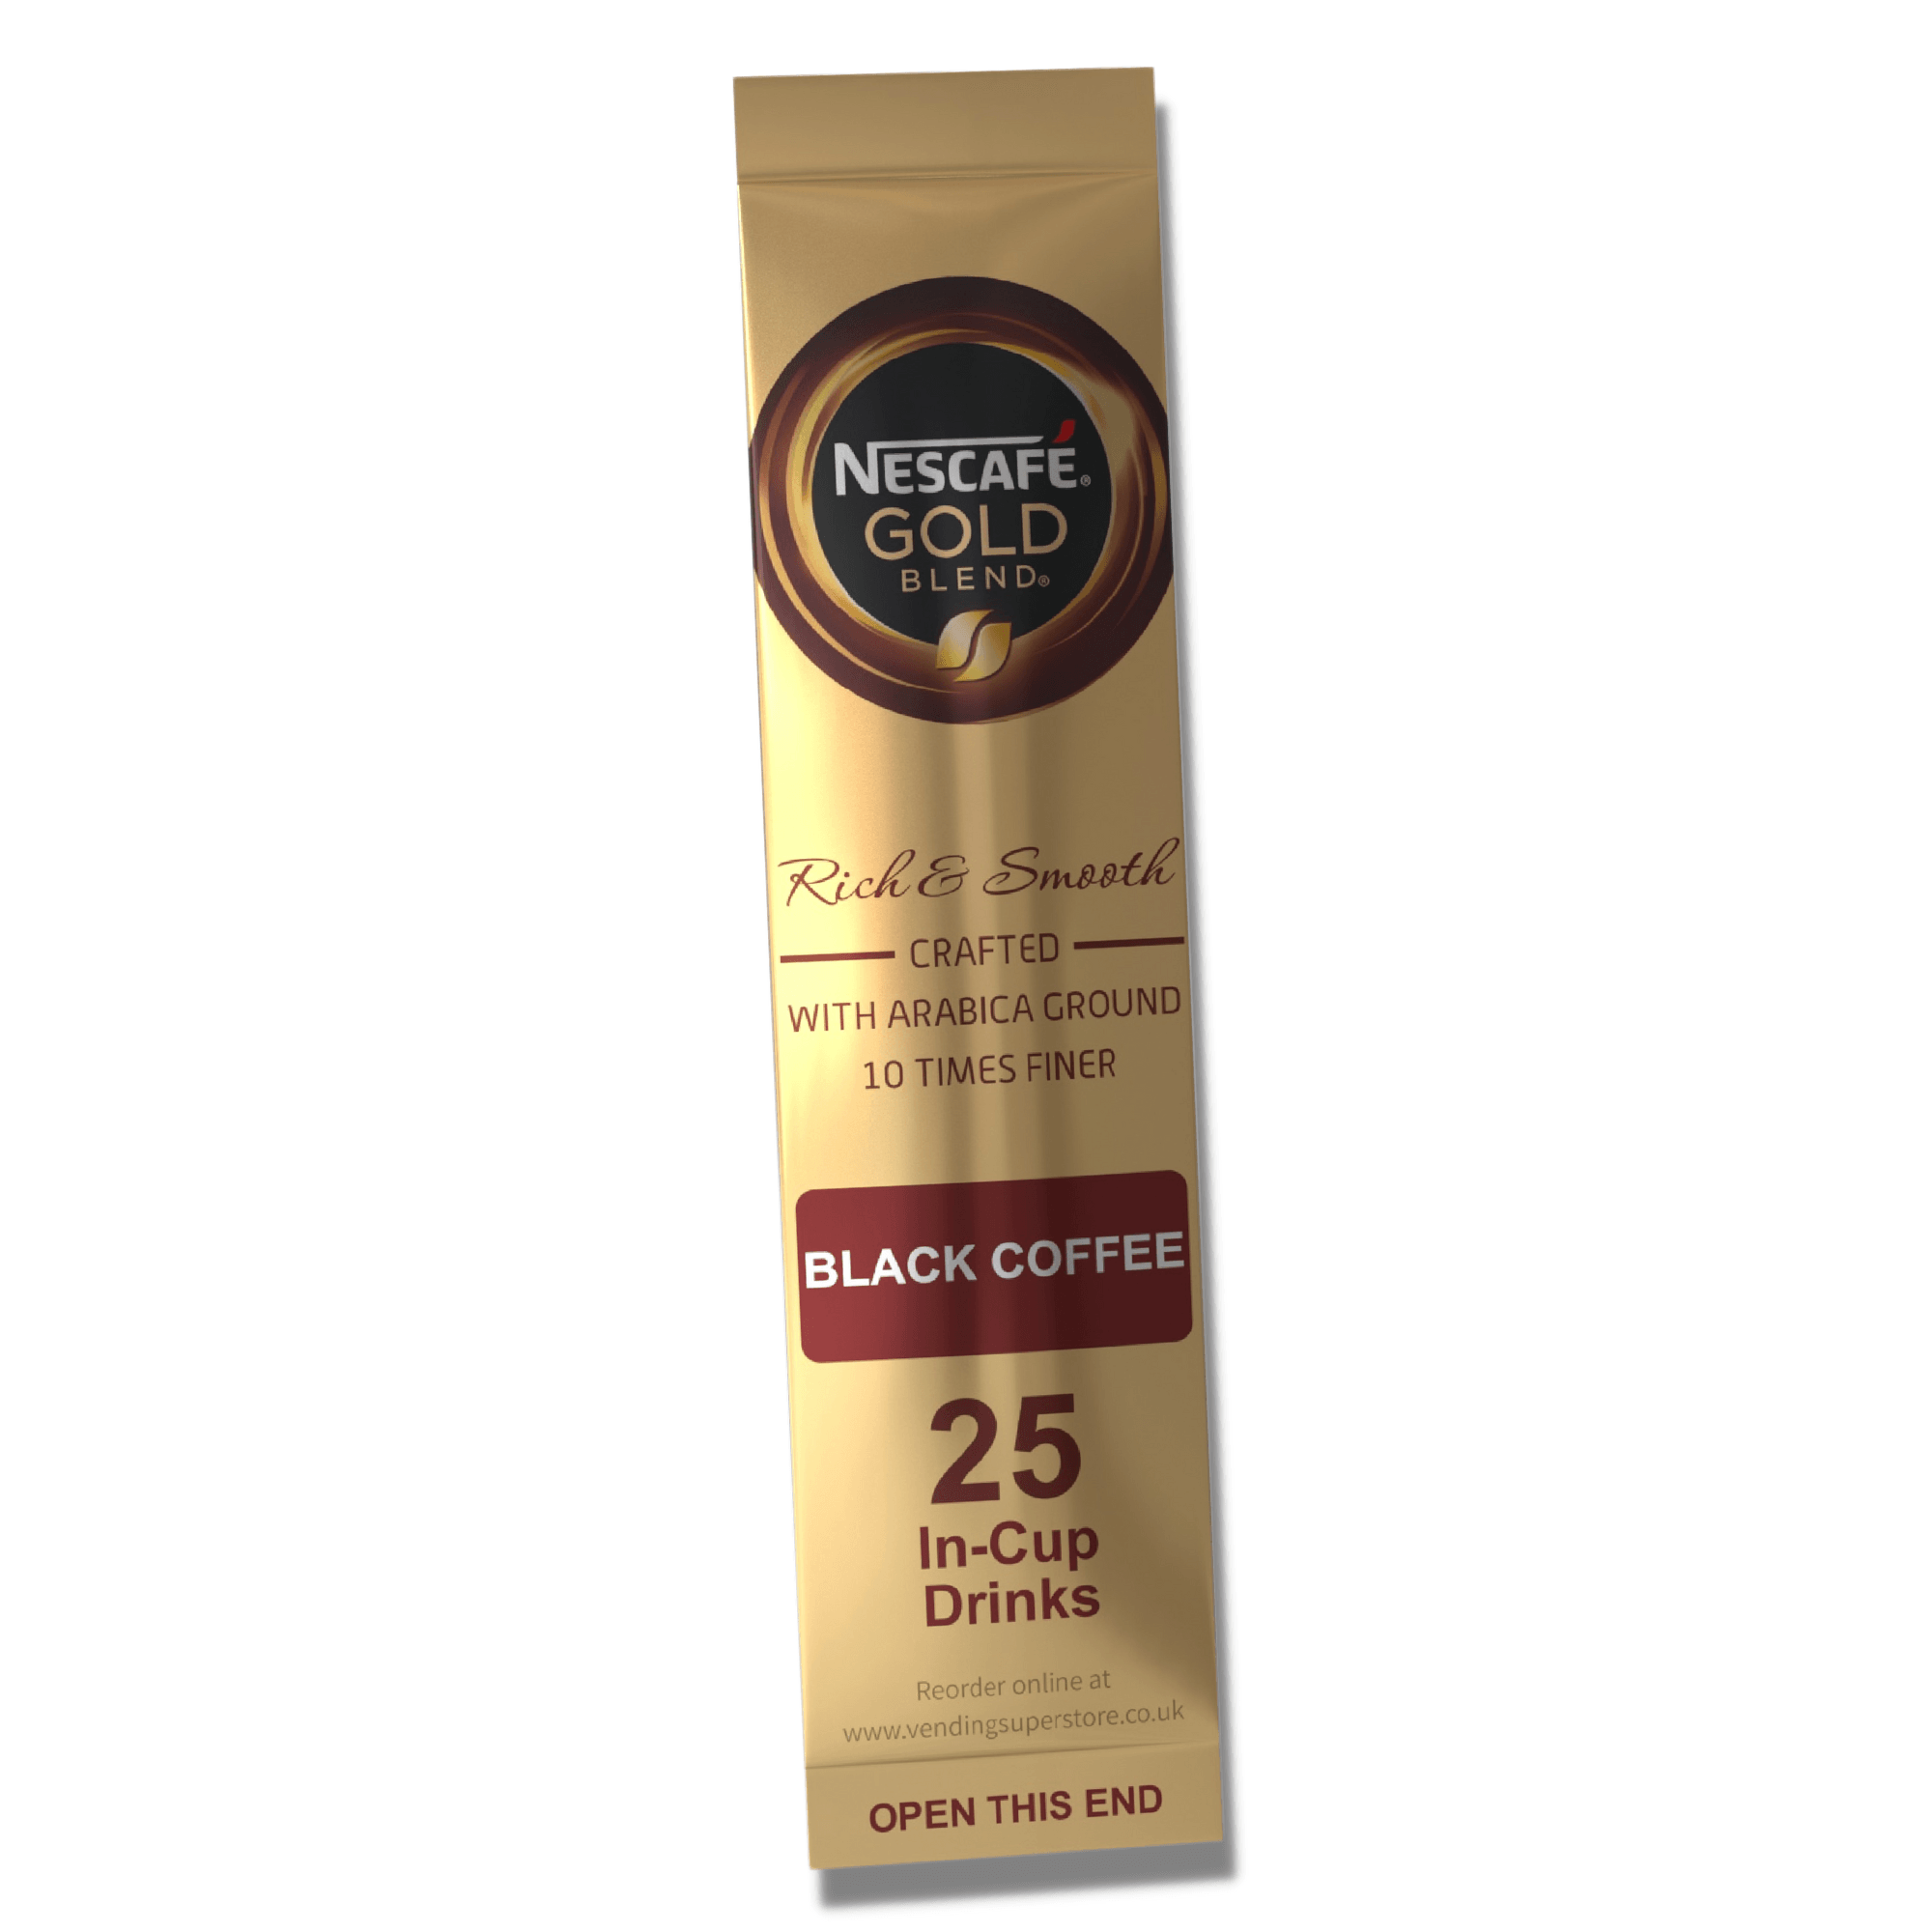 Incup Vending Drinks - Nescafe Gold Blend Black Coffee - Sleeve of 25 Cups - Vending Superstore